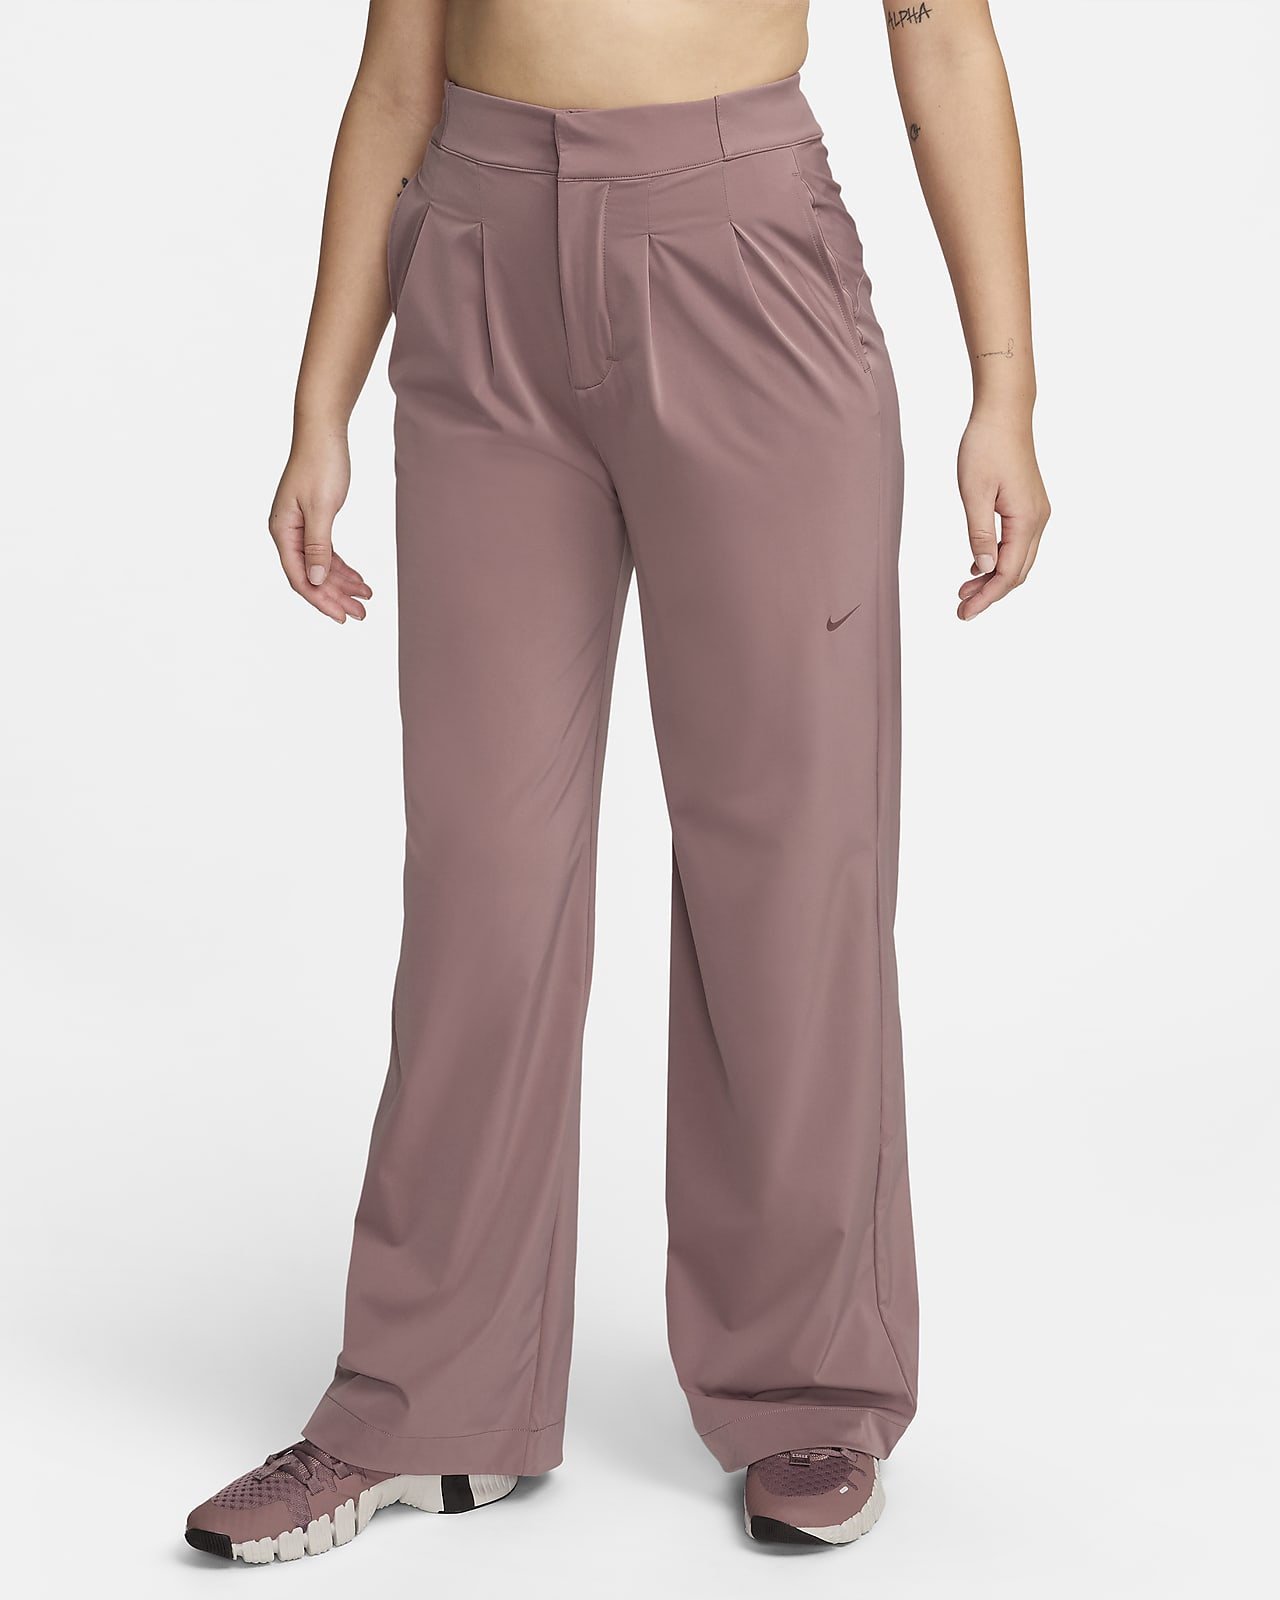 AUTHENTIC NIKE WOMEN NSW BELTED CUFFED TRACK PANTS DB3866-010